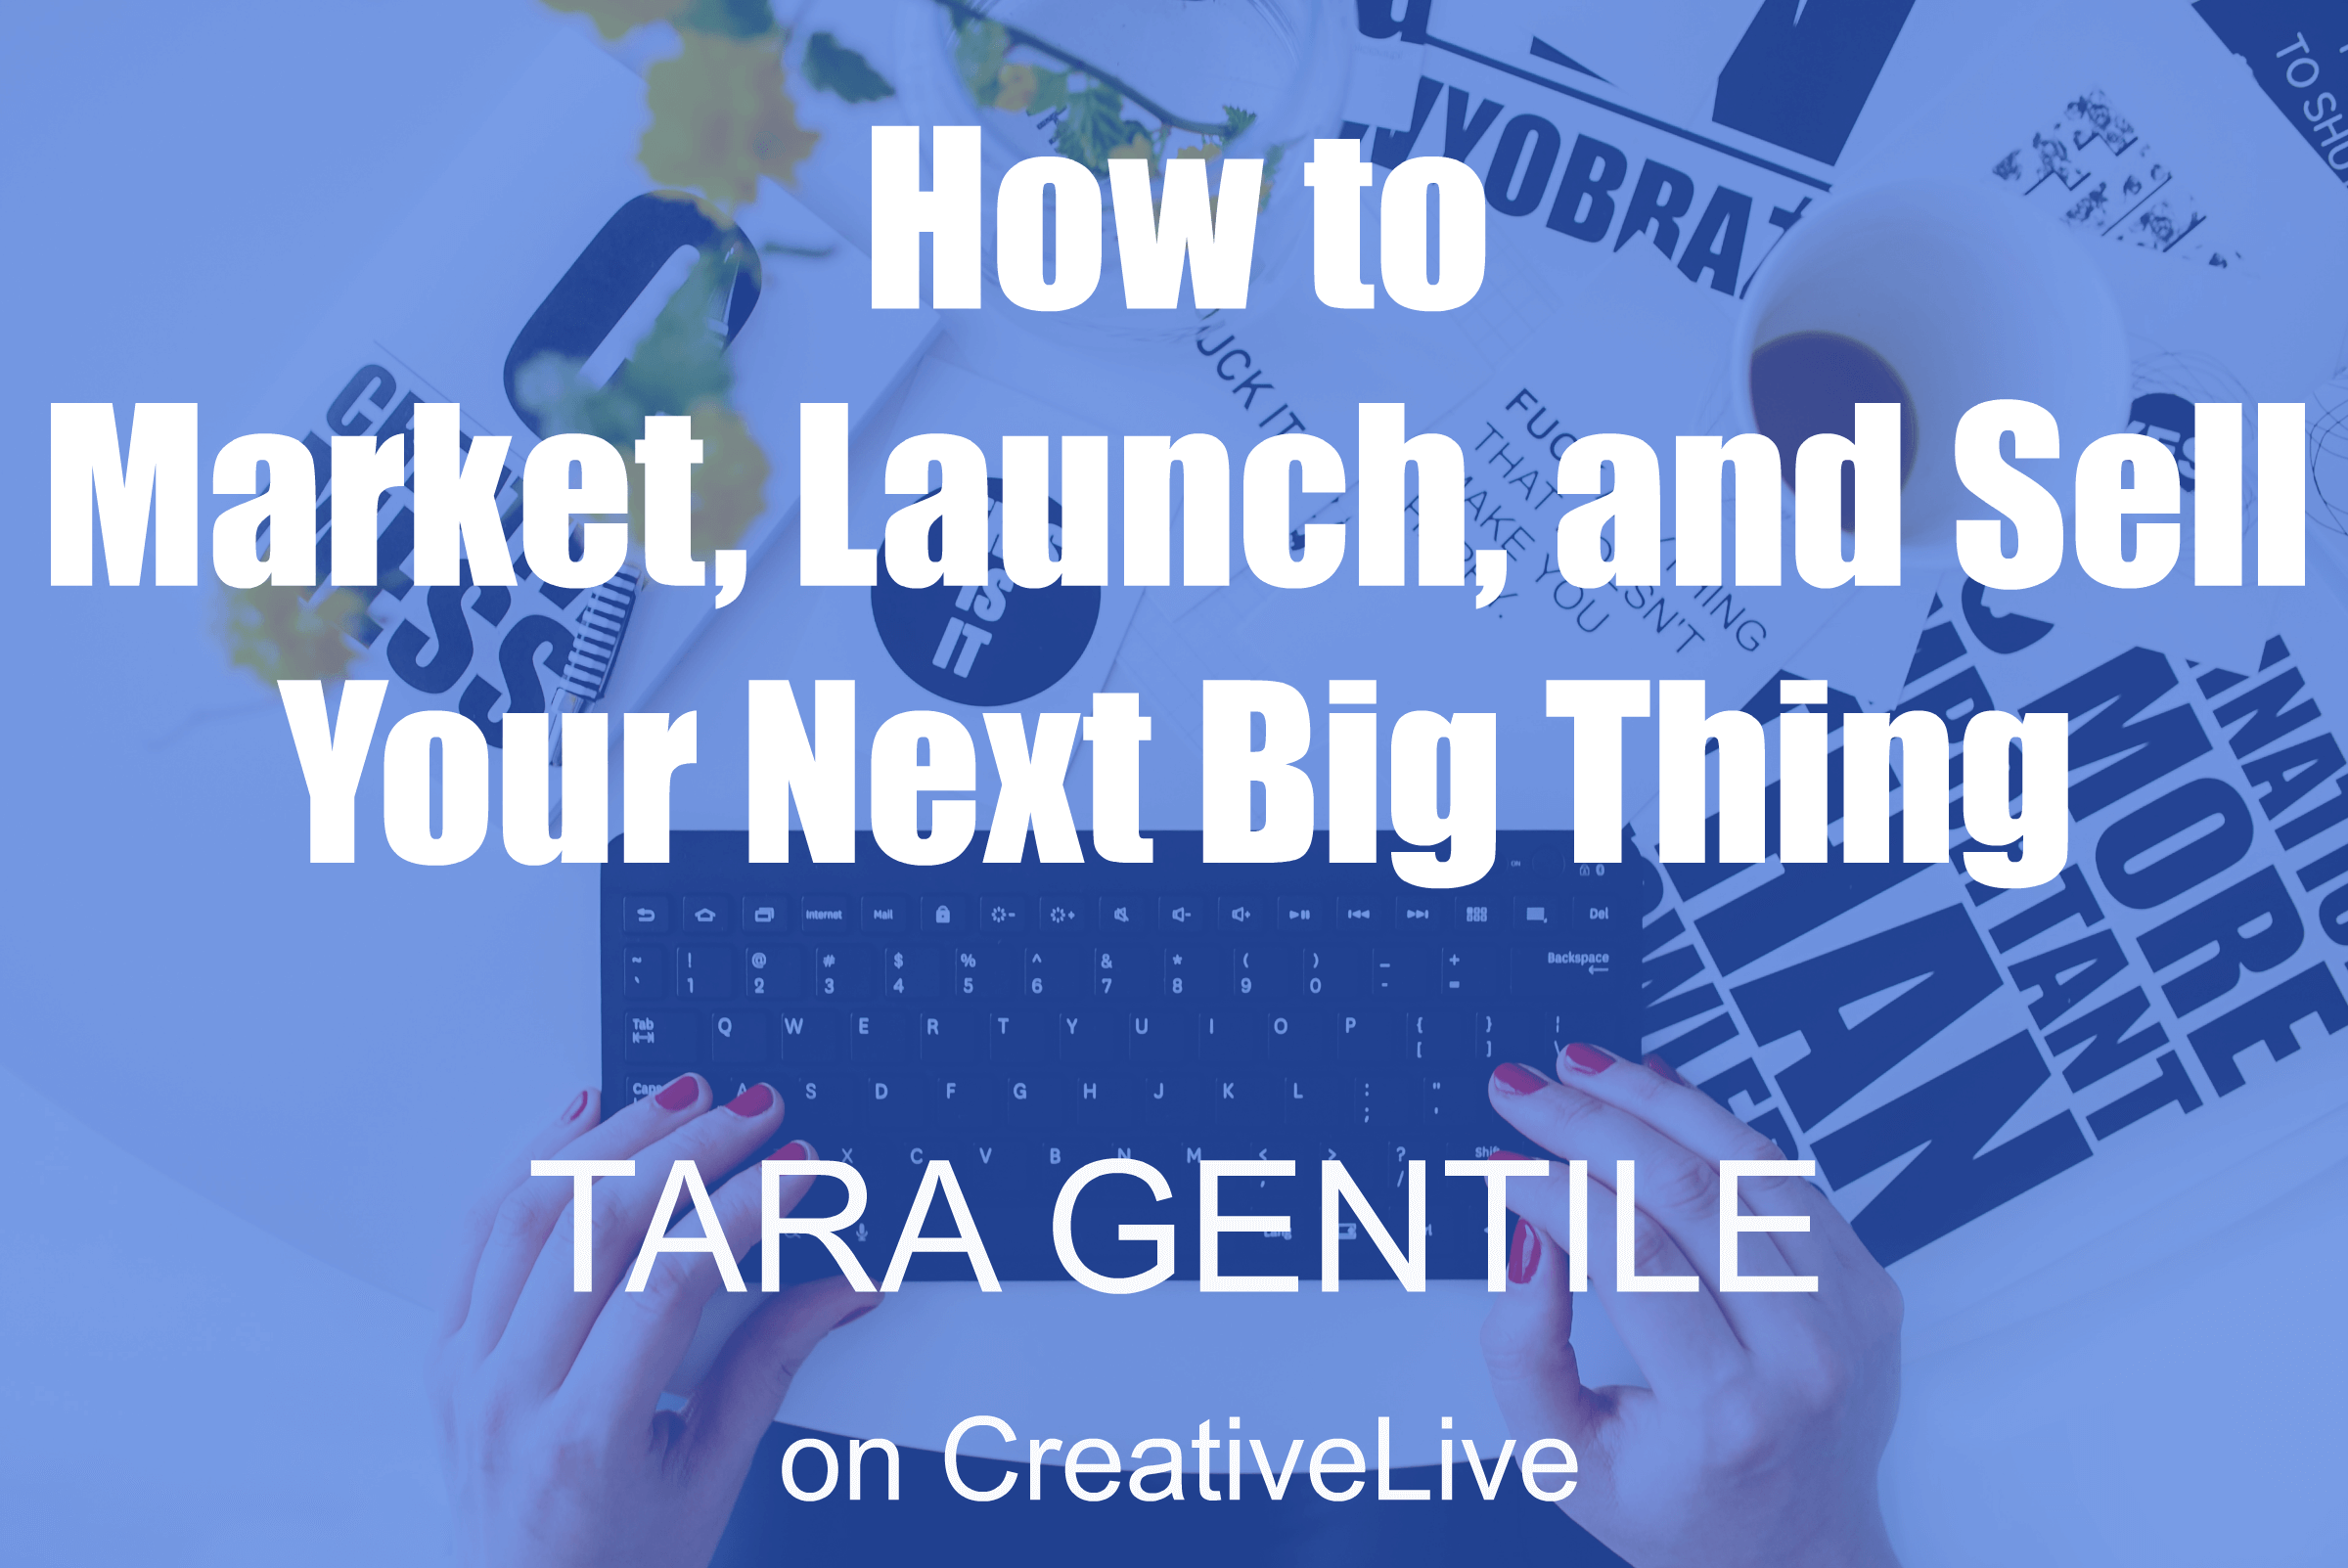 business developent, career minded women, CreativeLive, female entrepreneurs, get inspired, growing business, personal development, savvy women, Tara Gentile, unleash your creativity, Your Next Big Thing